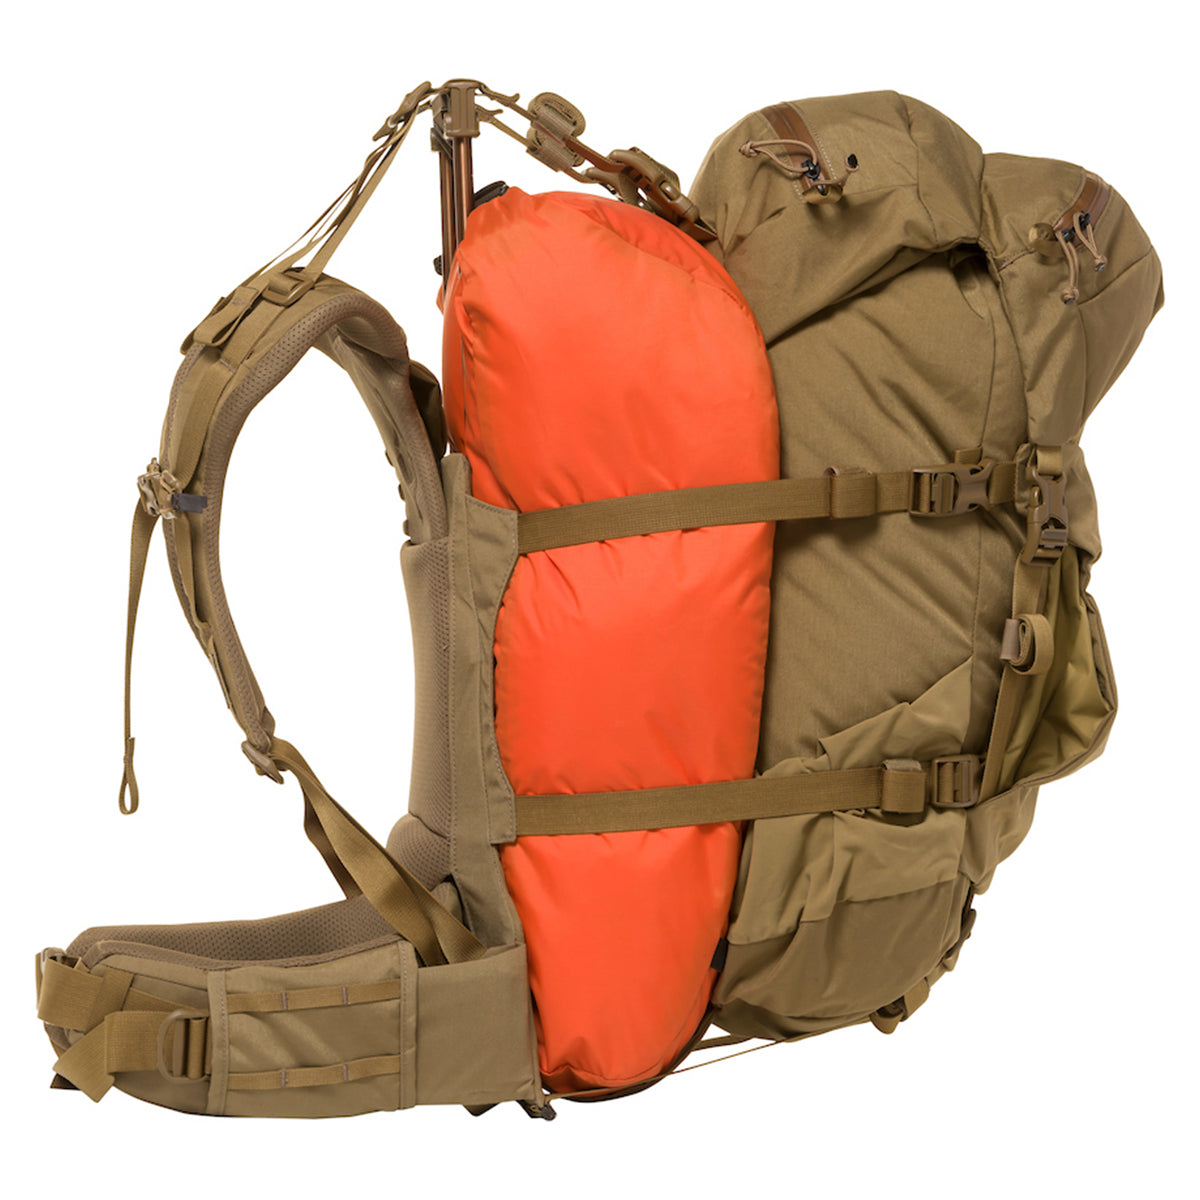 Mystery Ranch Pop Up 38 Backpack in Mystery Ranch Pop Up 38 Backpack (2020) by Mystery Ranch | Gear - goHUNT Shop by GOHUNT | Mystery Ranch - GOHUNT Shop